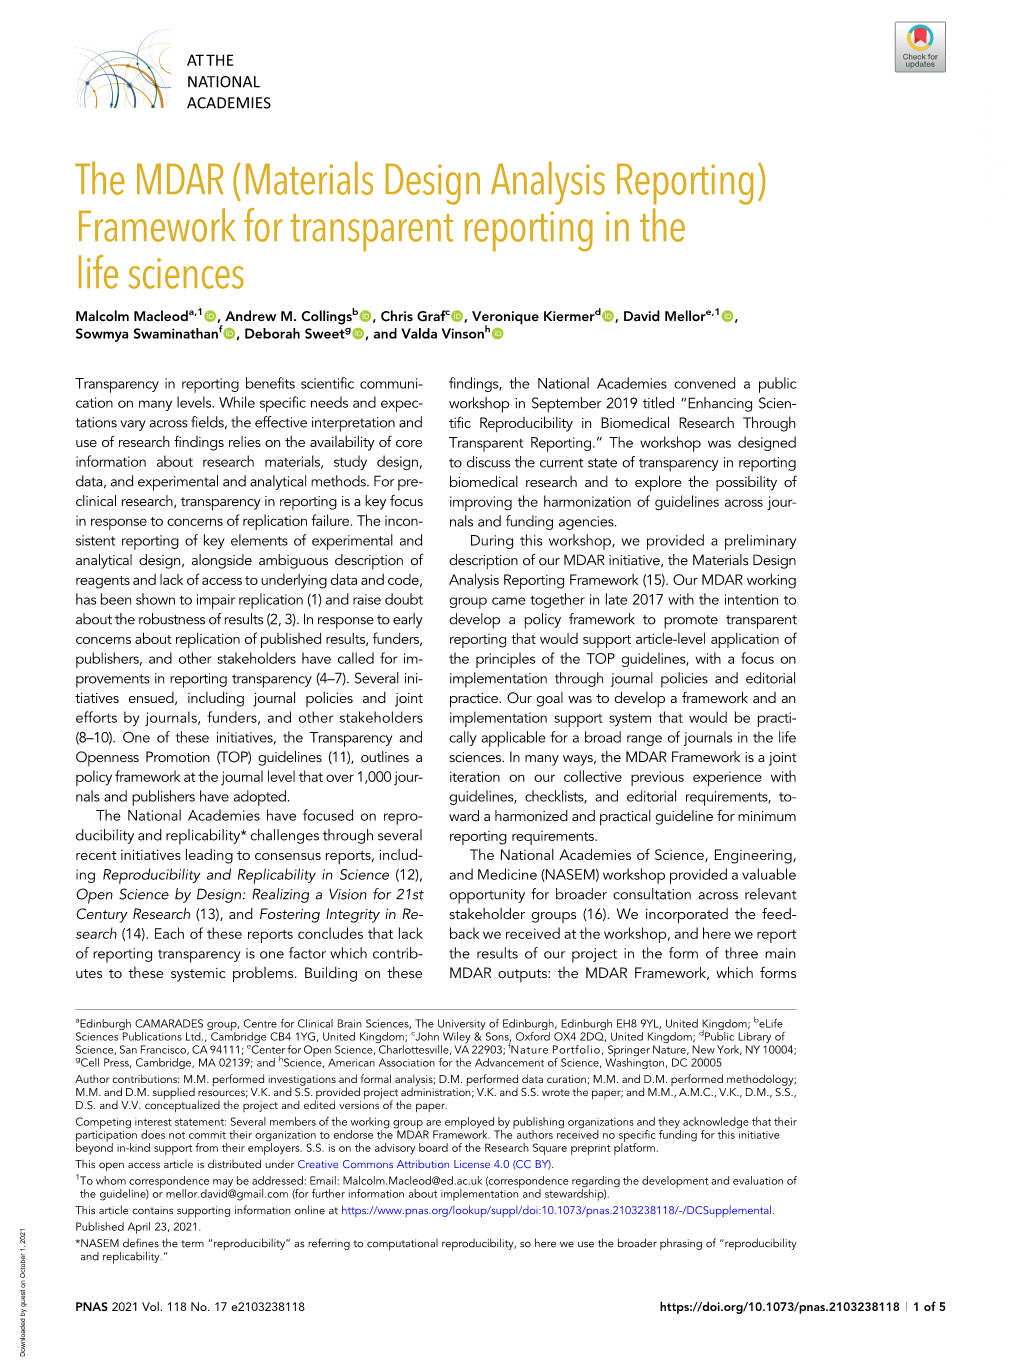 The MDAR (Materials Design Analysis Reporting) Framework for Transparent Reporting in the Life Sciences